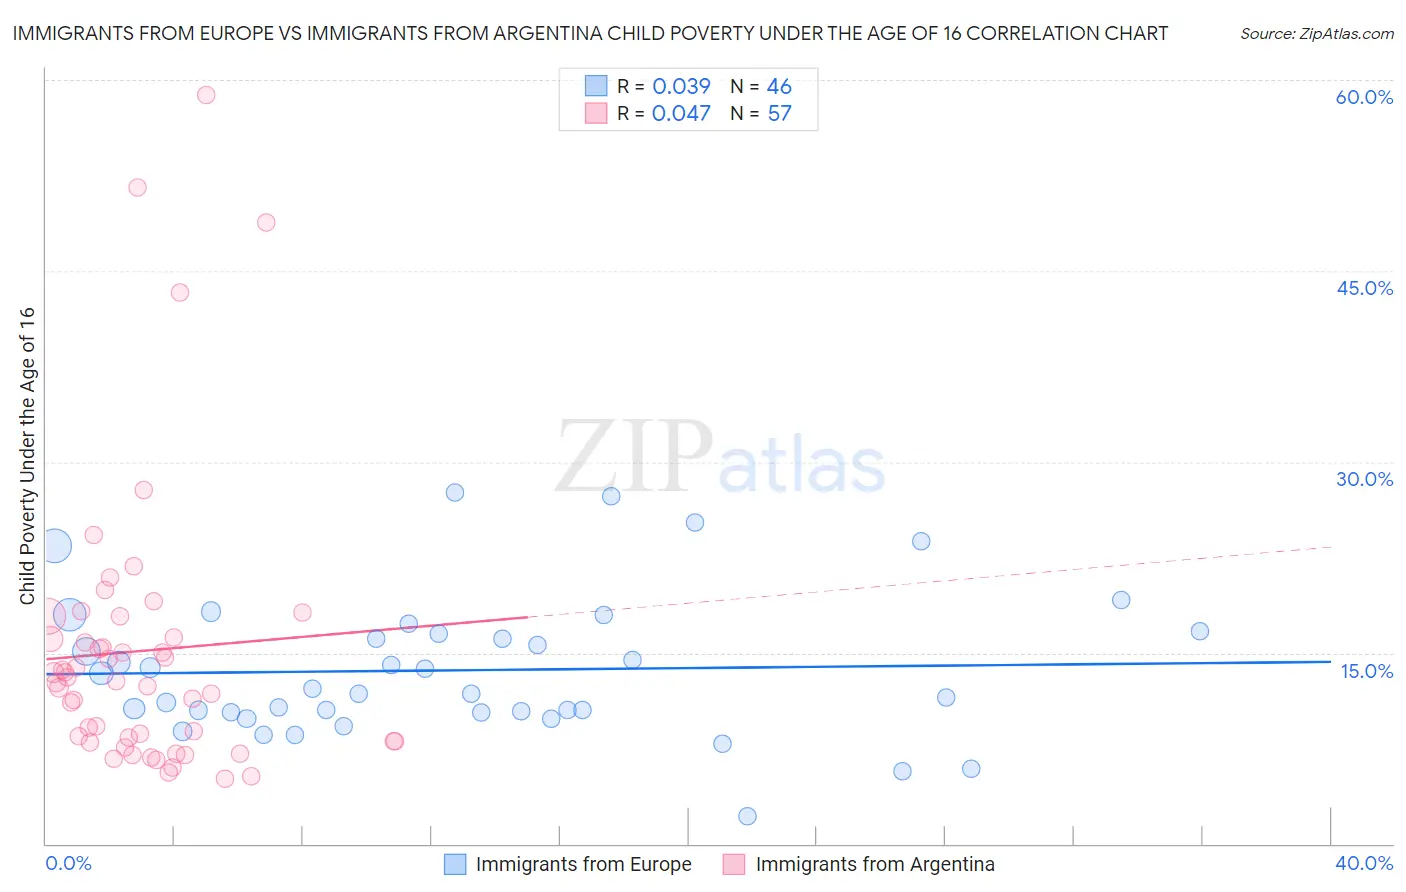 Immigrants from Europe vs Immigrants from Argentina Child Poverty Under the Age of 16